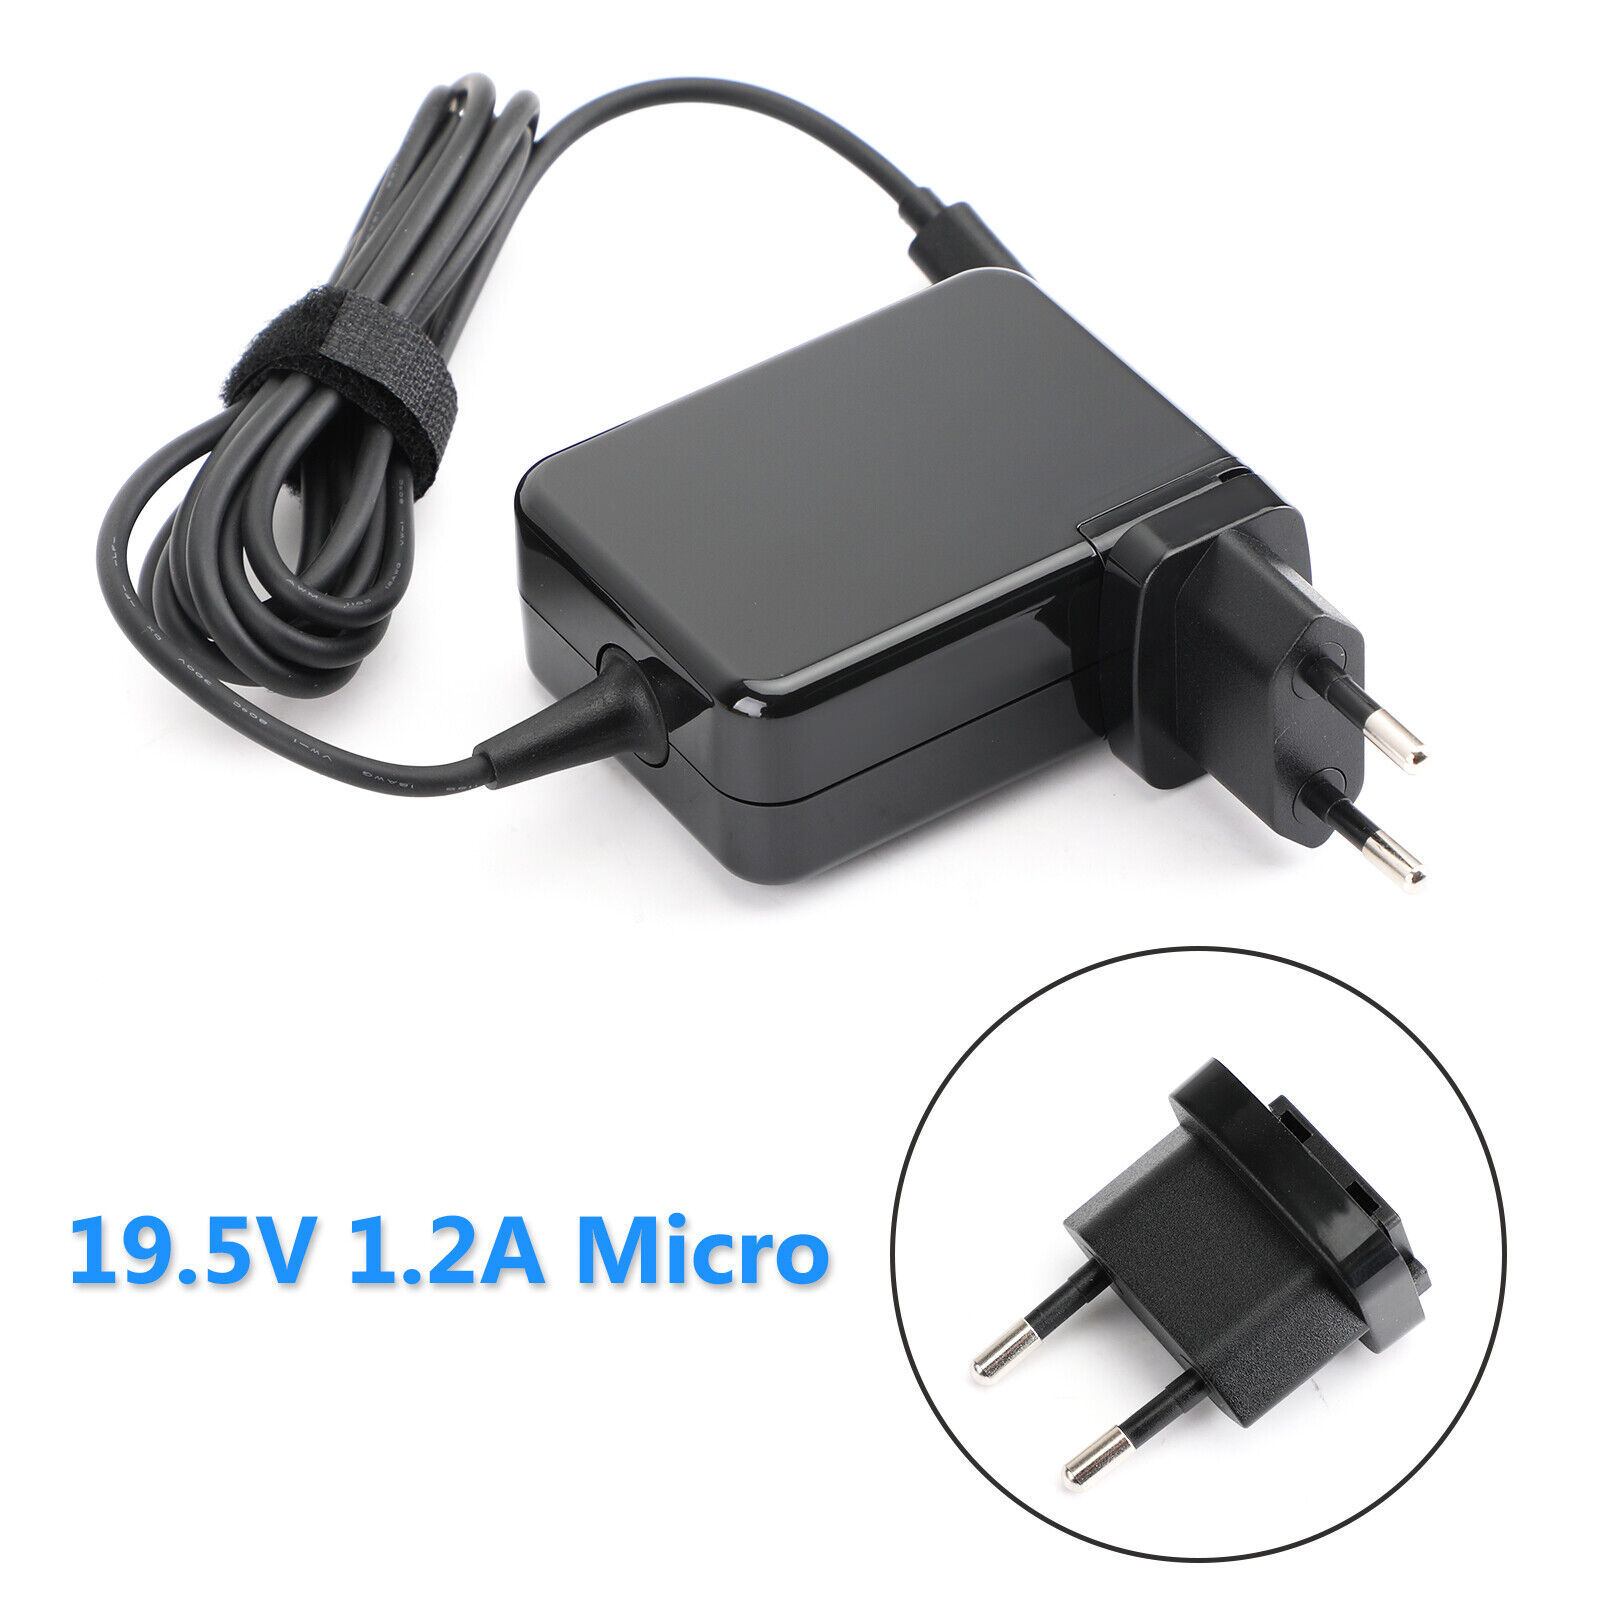 24W AC Power Supply 19.5V 1.2A charger adapter for Dell Venue 11 Pro Laptop 7139